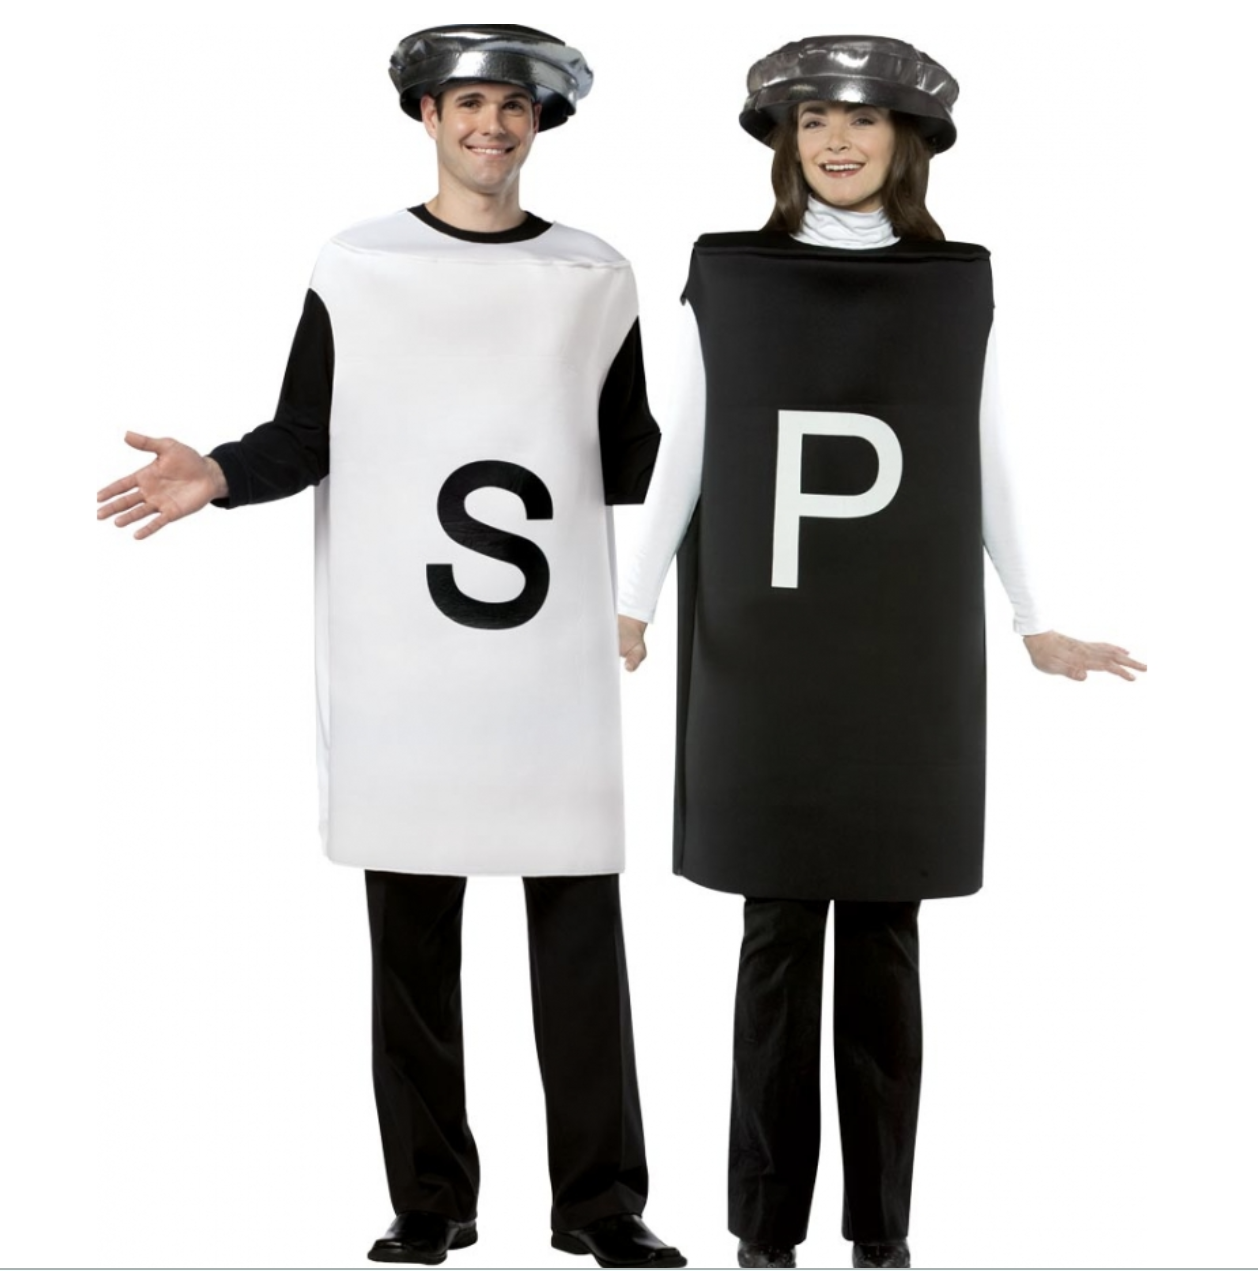 man in a salt shaker costume and woman in a pepper shaker costume